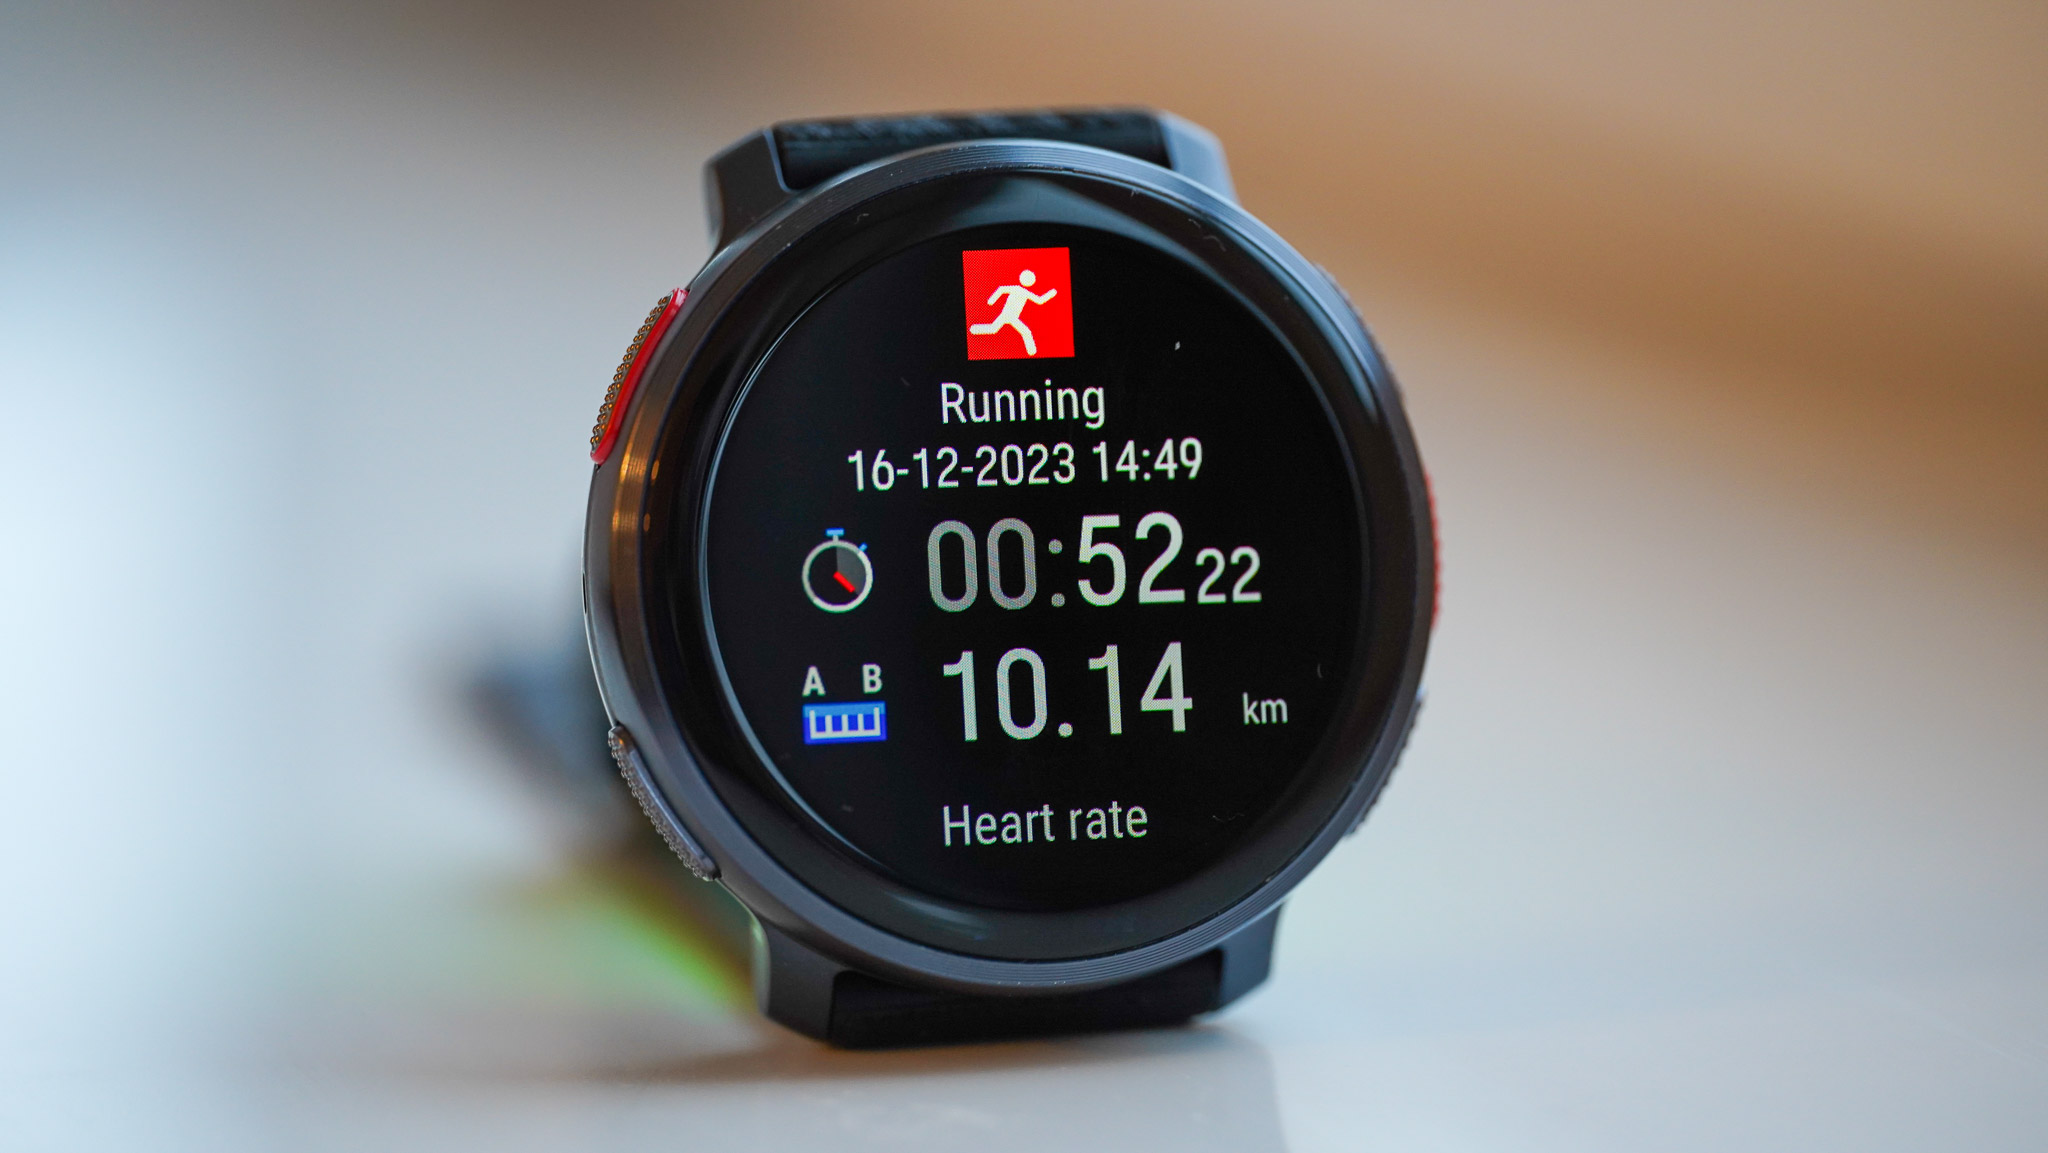 Polar Vantage V3 review: oodles of recovery features